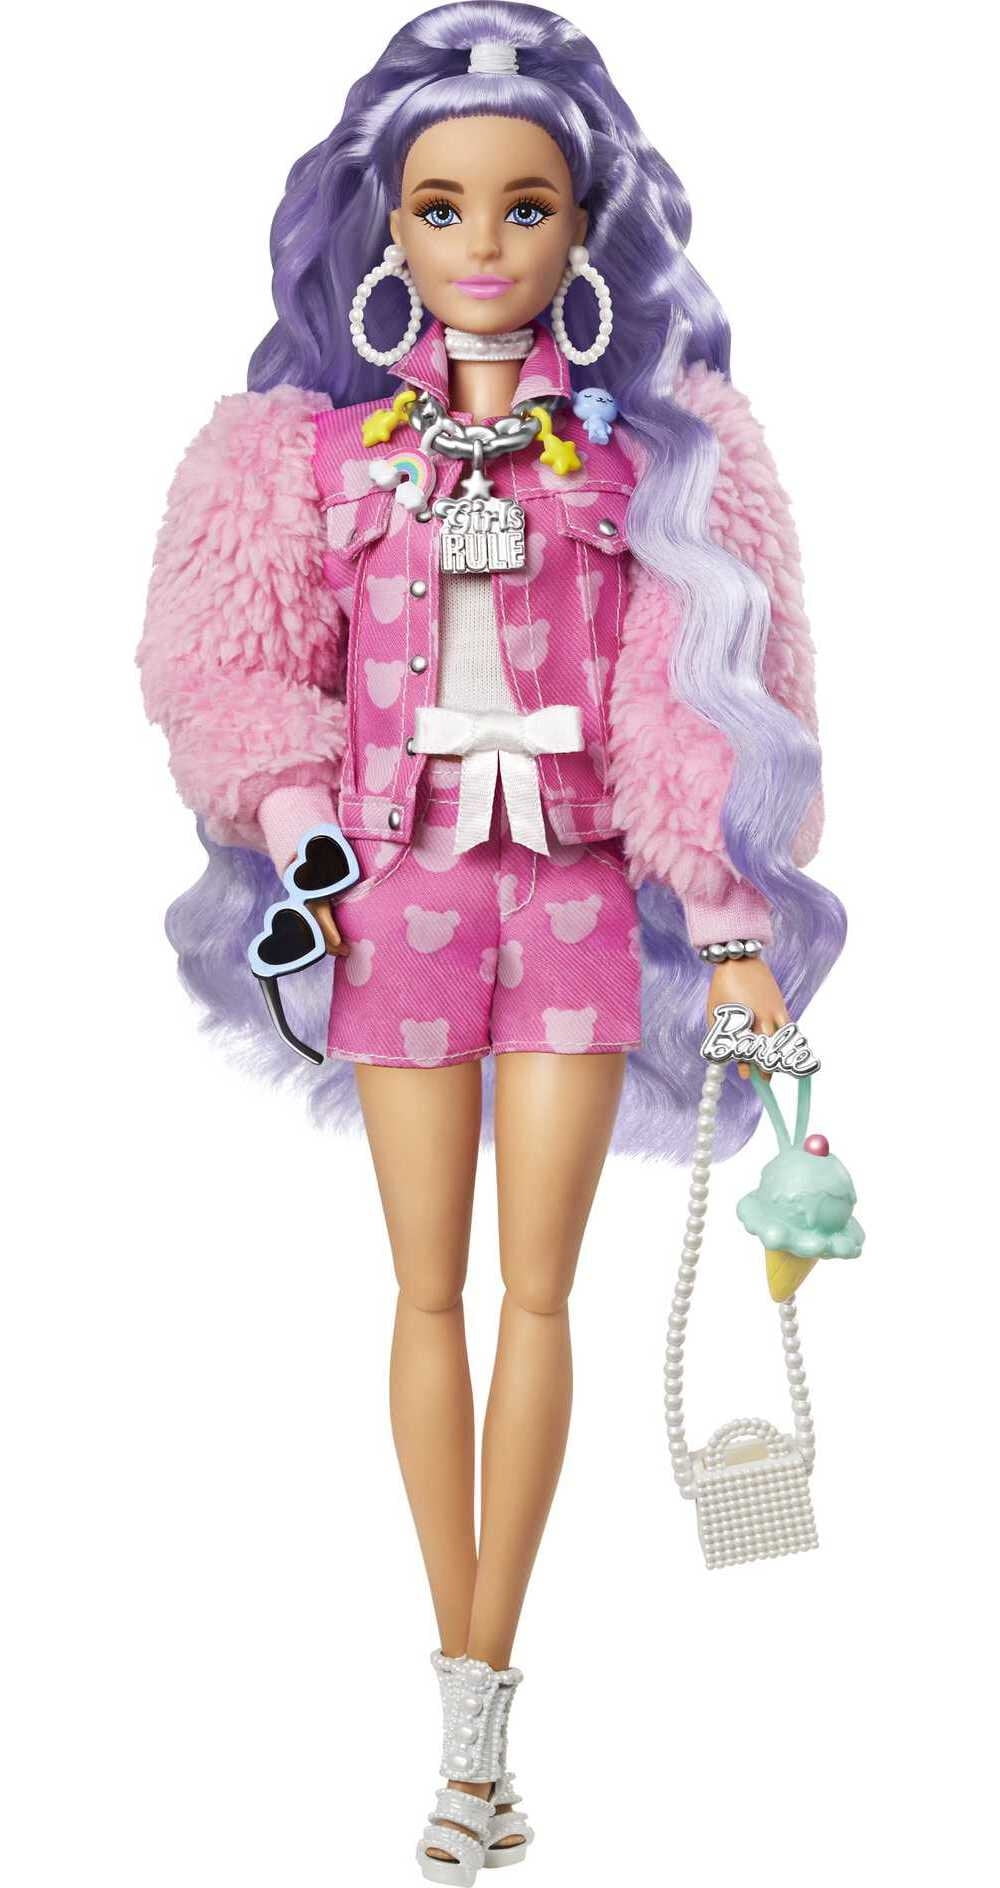 Barbie Extra Fashion with Periwinkle Hair Denim Jacket & Shorts with Accessories - Walmart.com